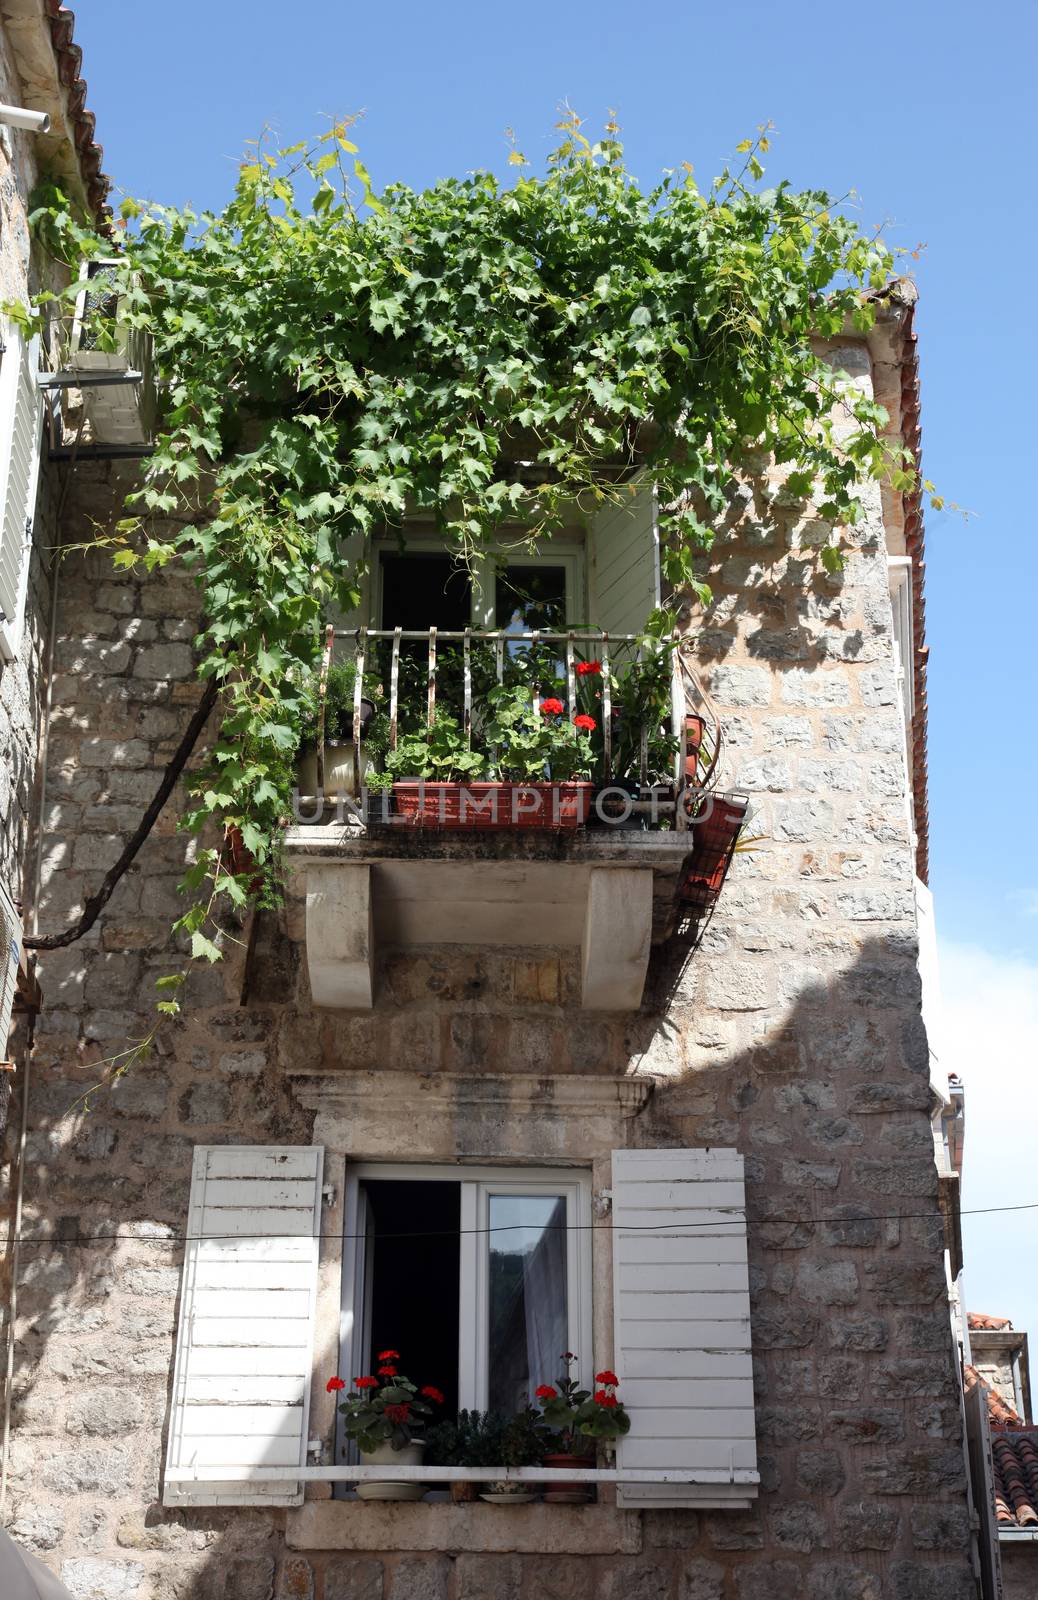 Mediterranean stone medieval house with window shutters and pot plants, Budva, Montenegro